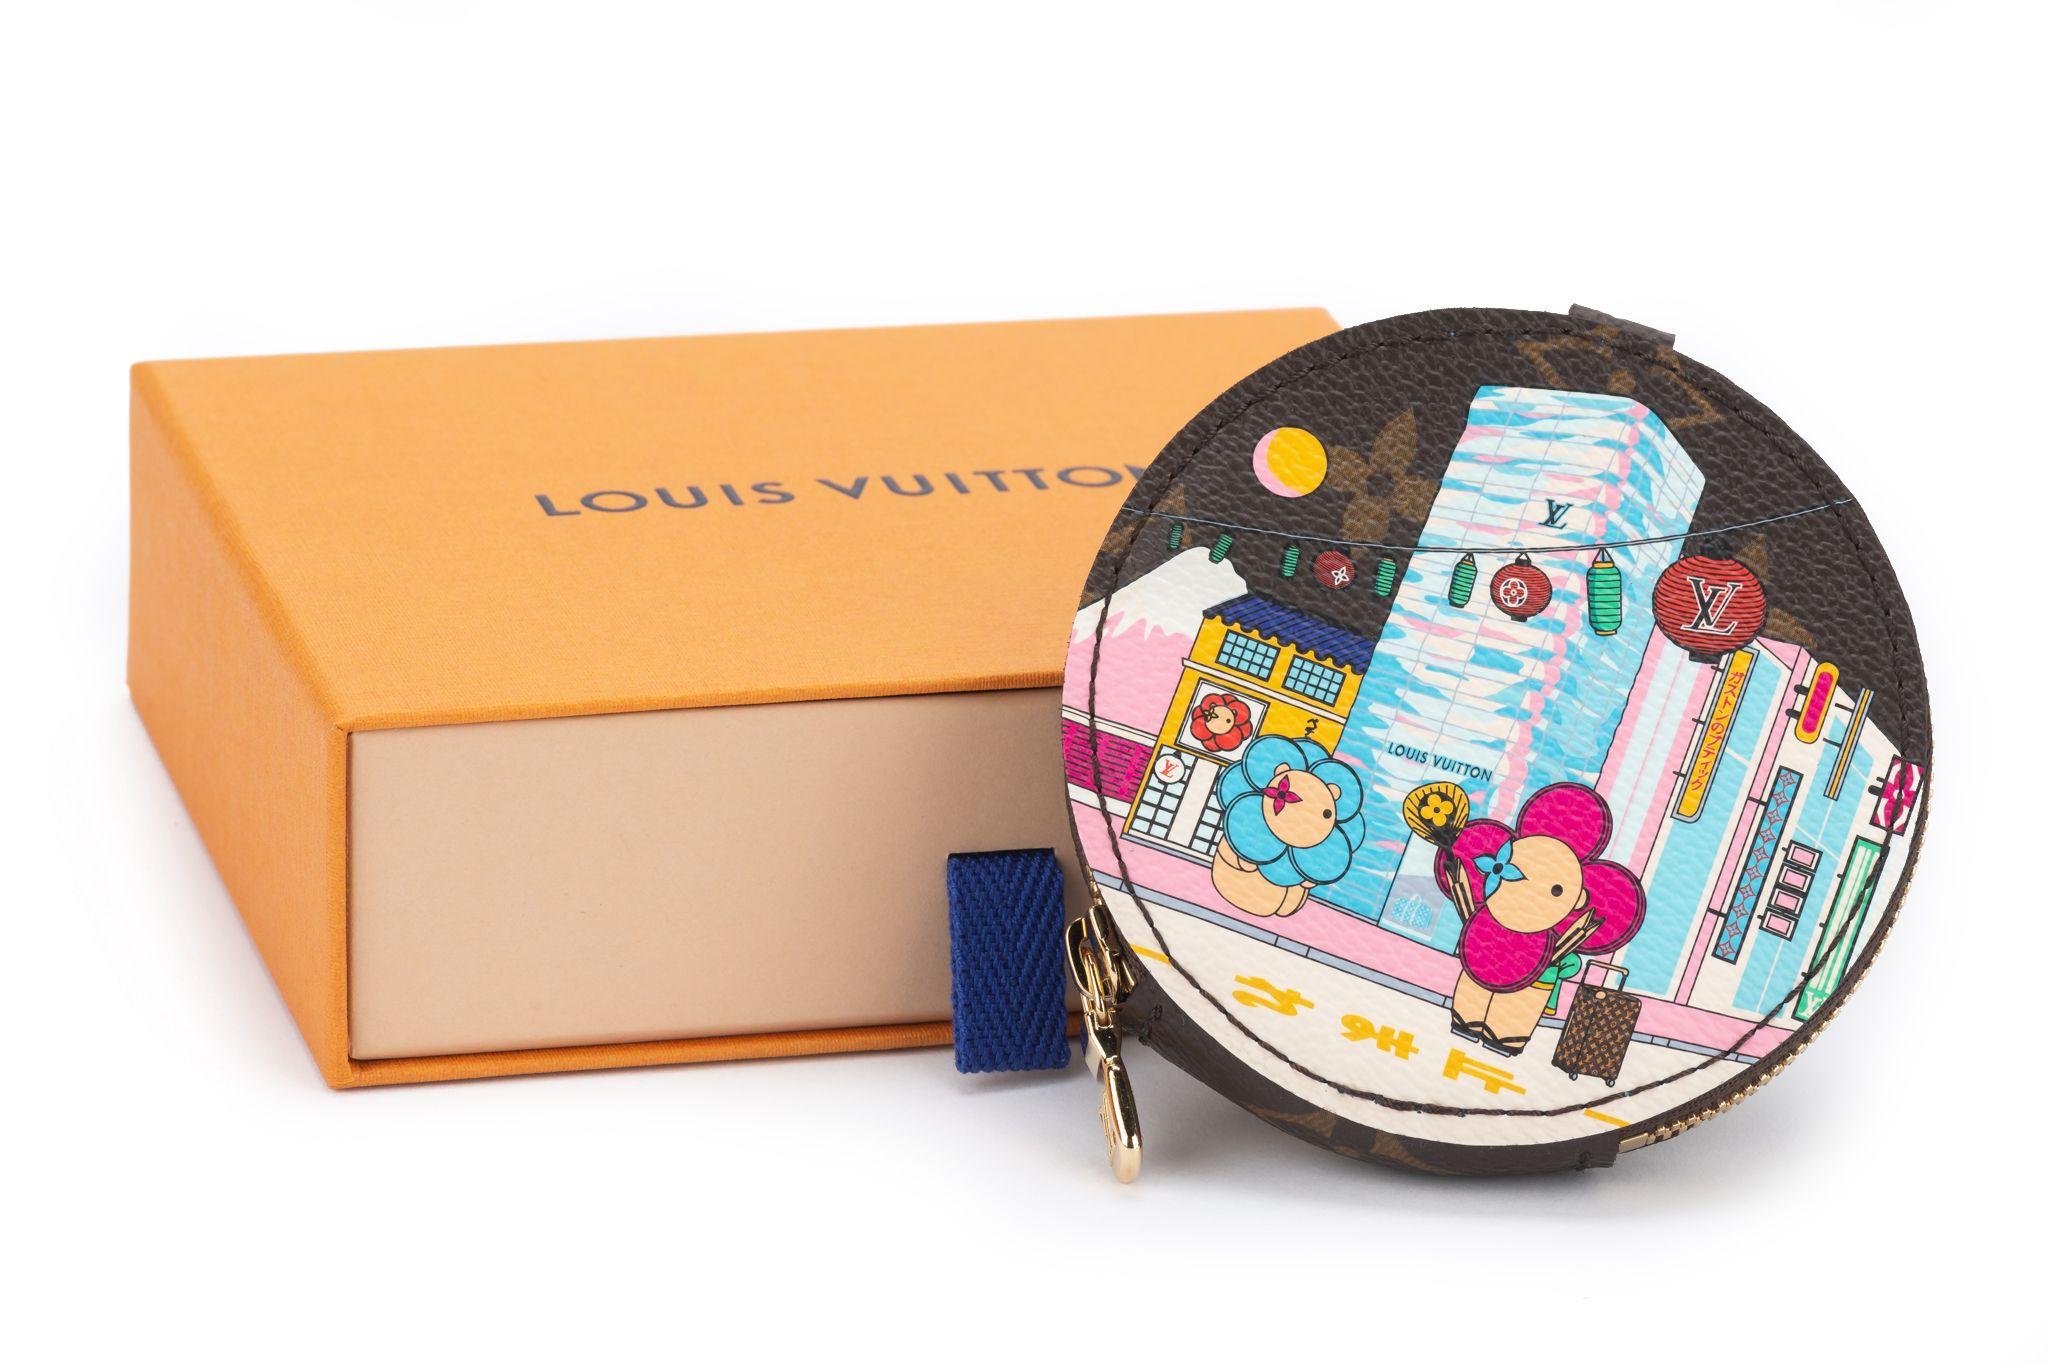 Louis Vuitton Limited Edition Holidays Collection Vivienne Animation Xmas  2021 Round Coin Purse Bag Charm - SOLD